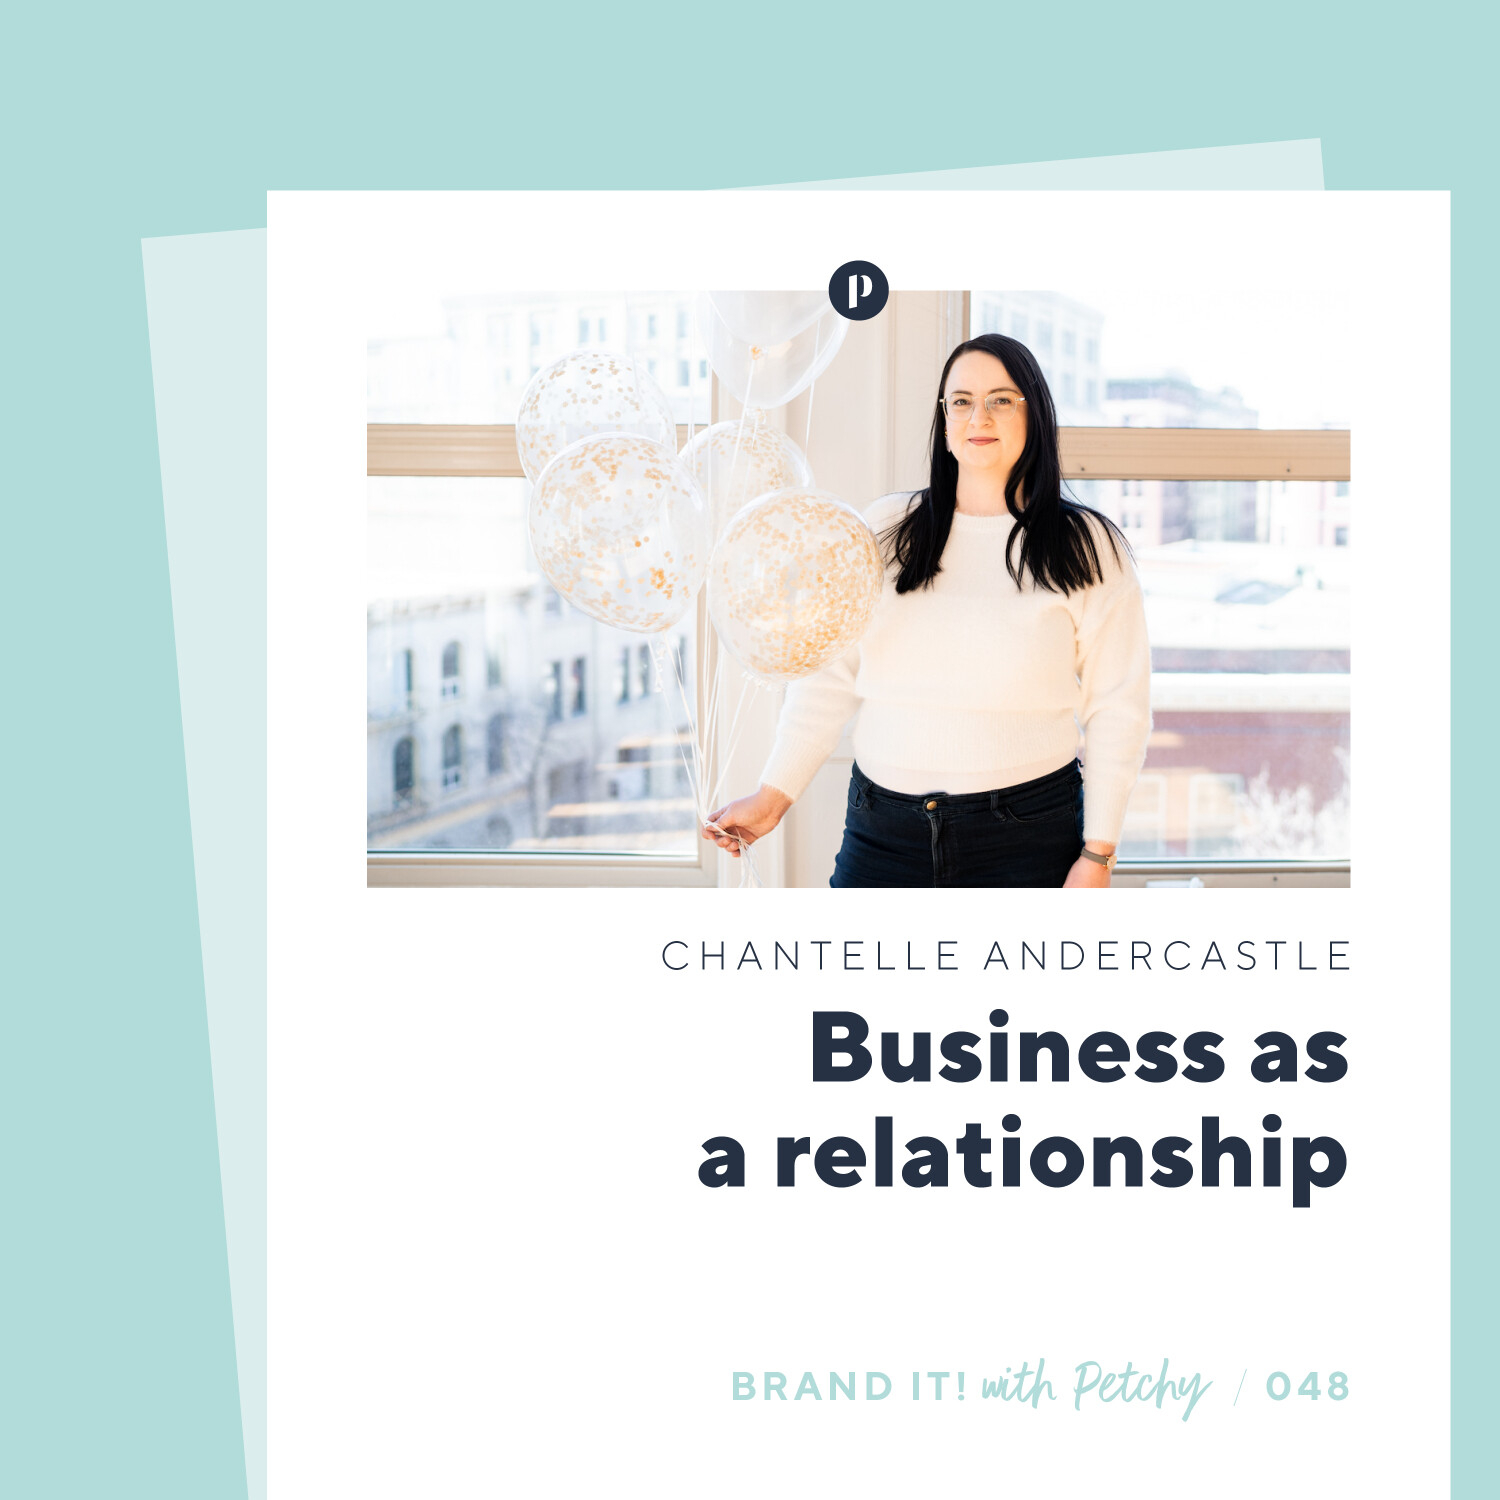 Business as a relationship w/ Chantelle Andercastle